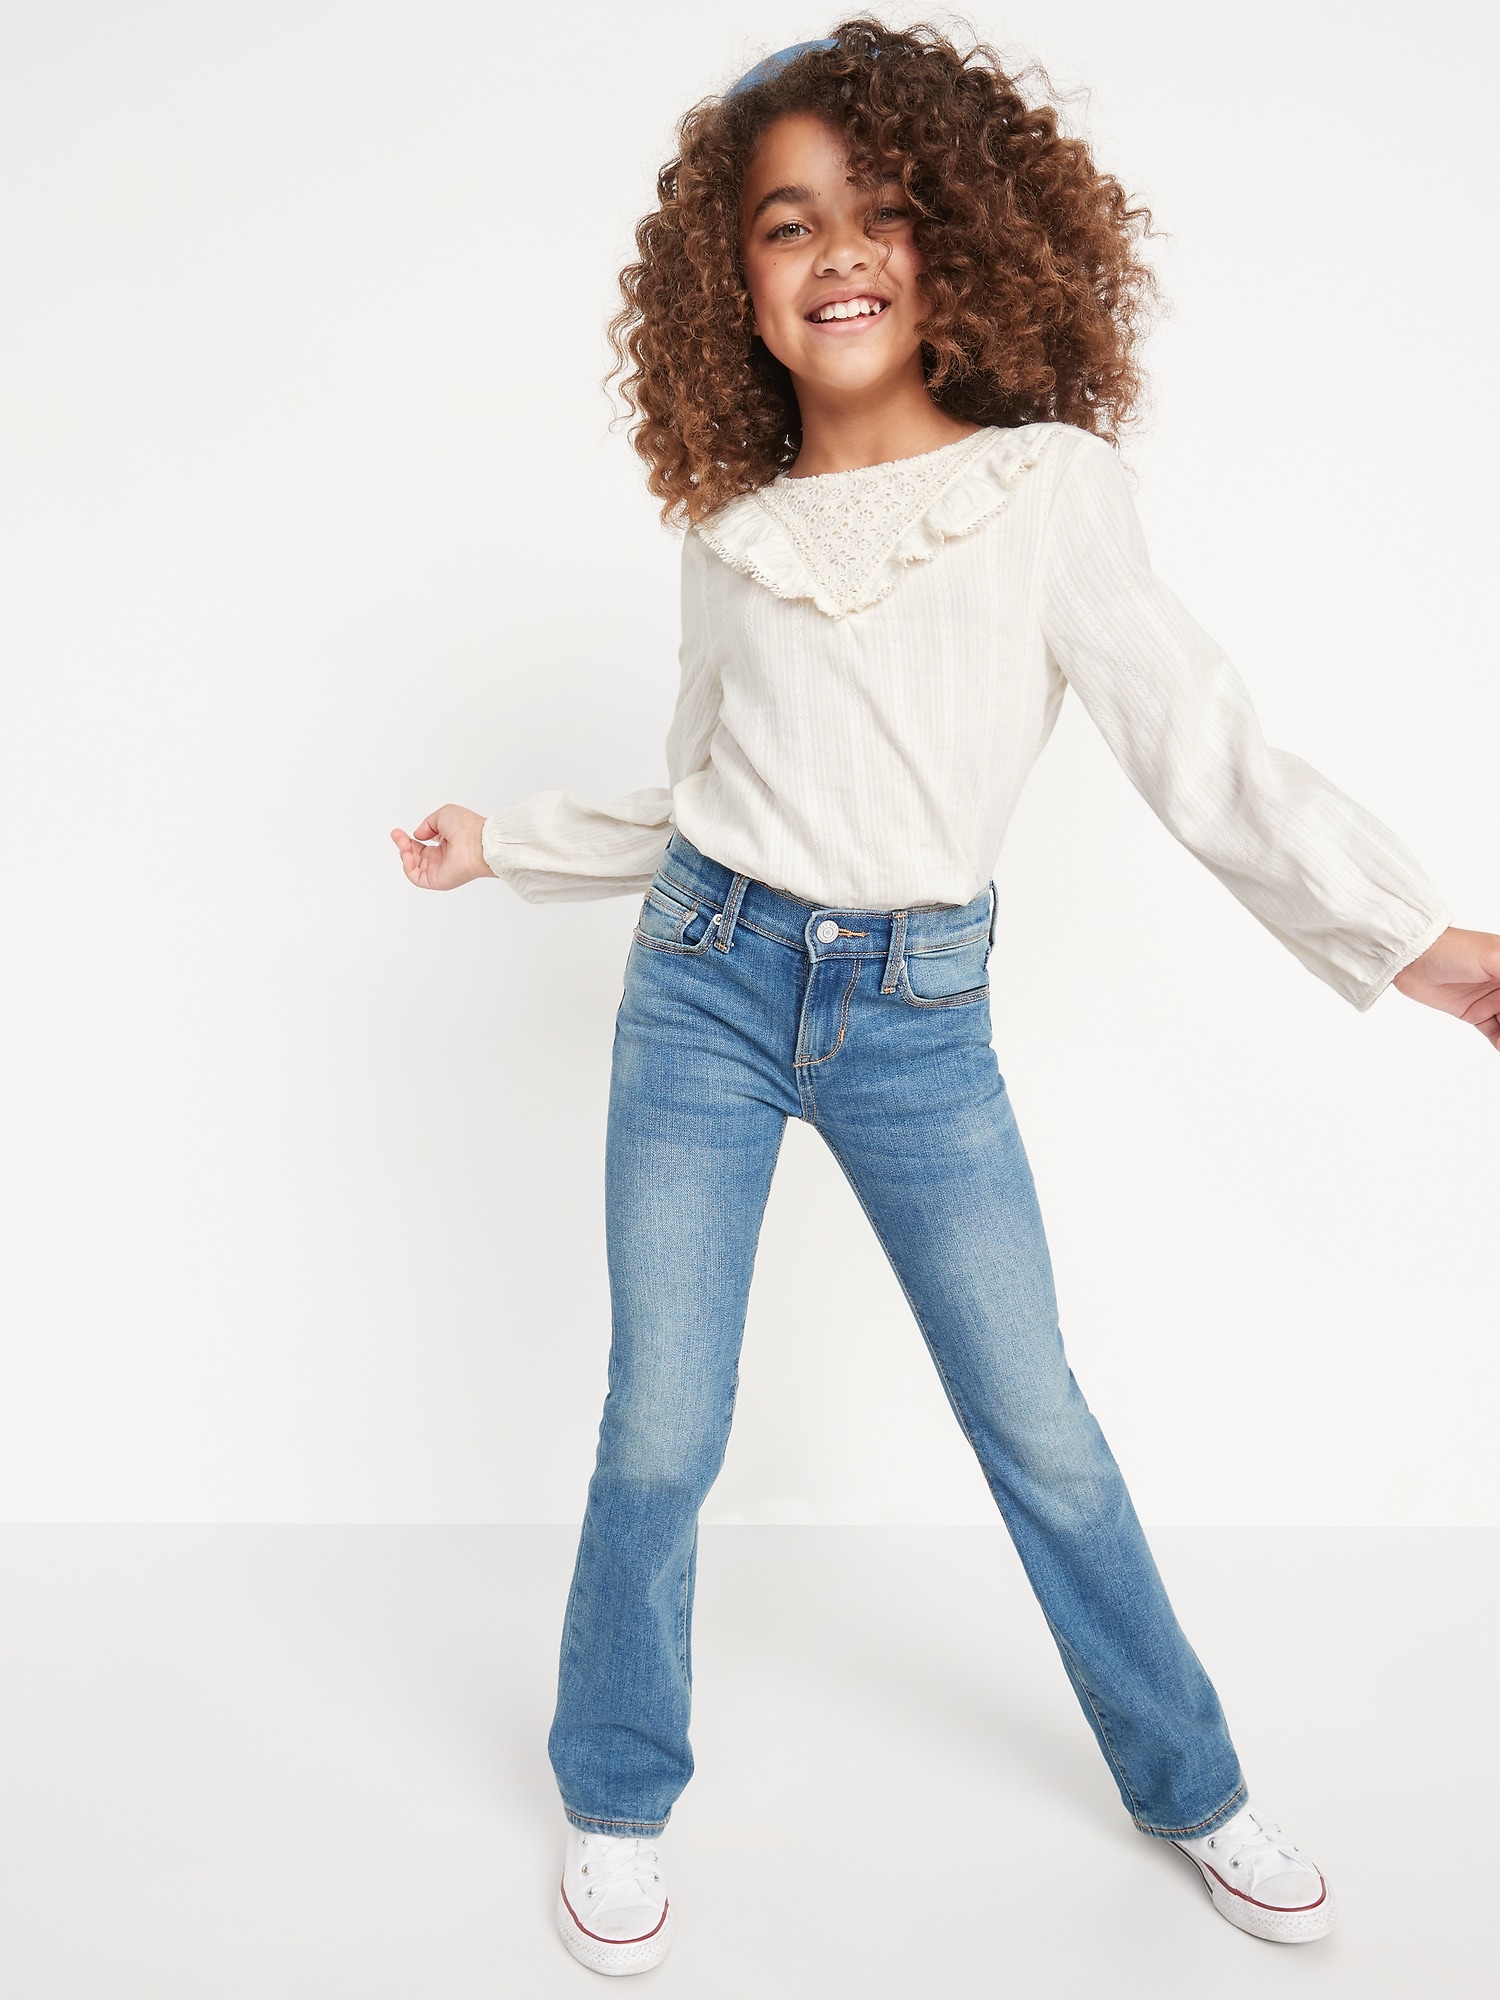 Boot-Cut Jeans for Girls | Old Navy